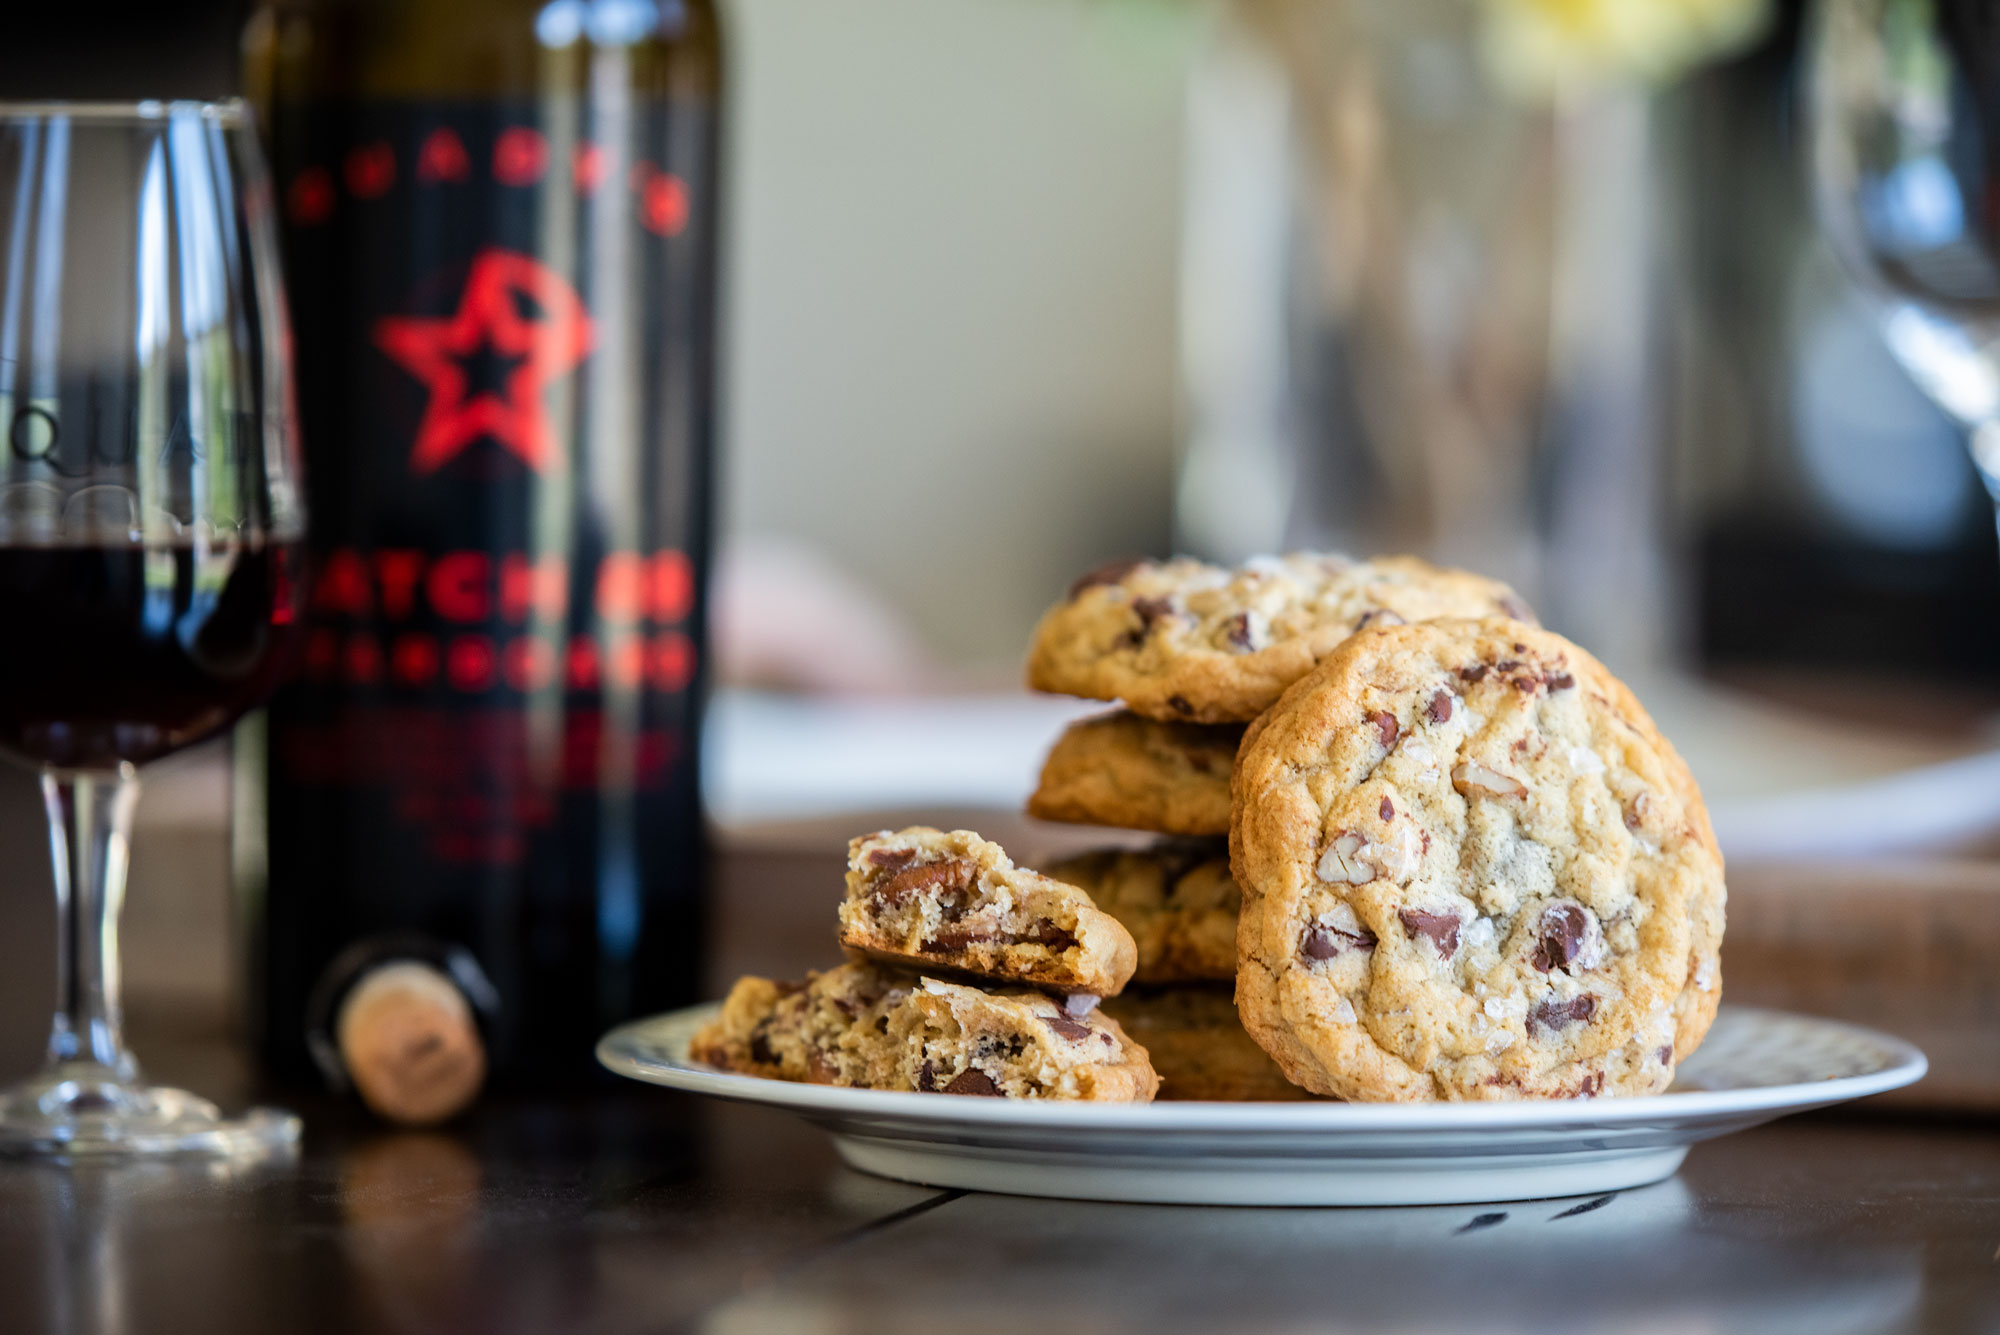 Sarah's famous chocolate chip cookies on a plate next to a bottle of Quady's Starboard Batch 88 port style wine.